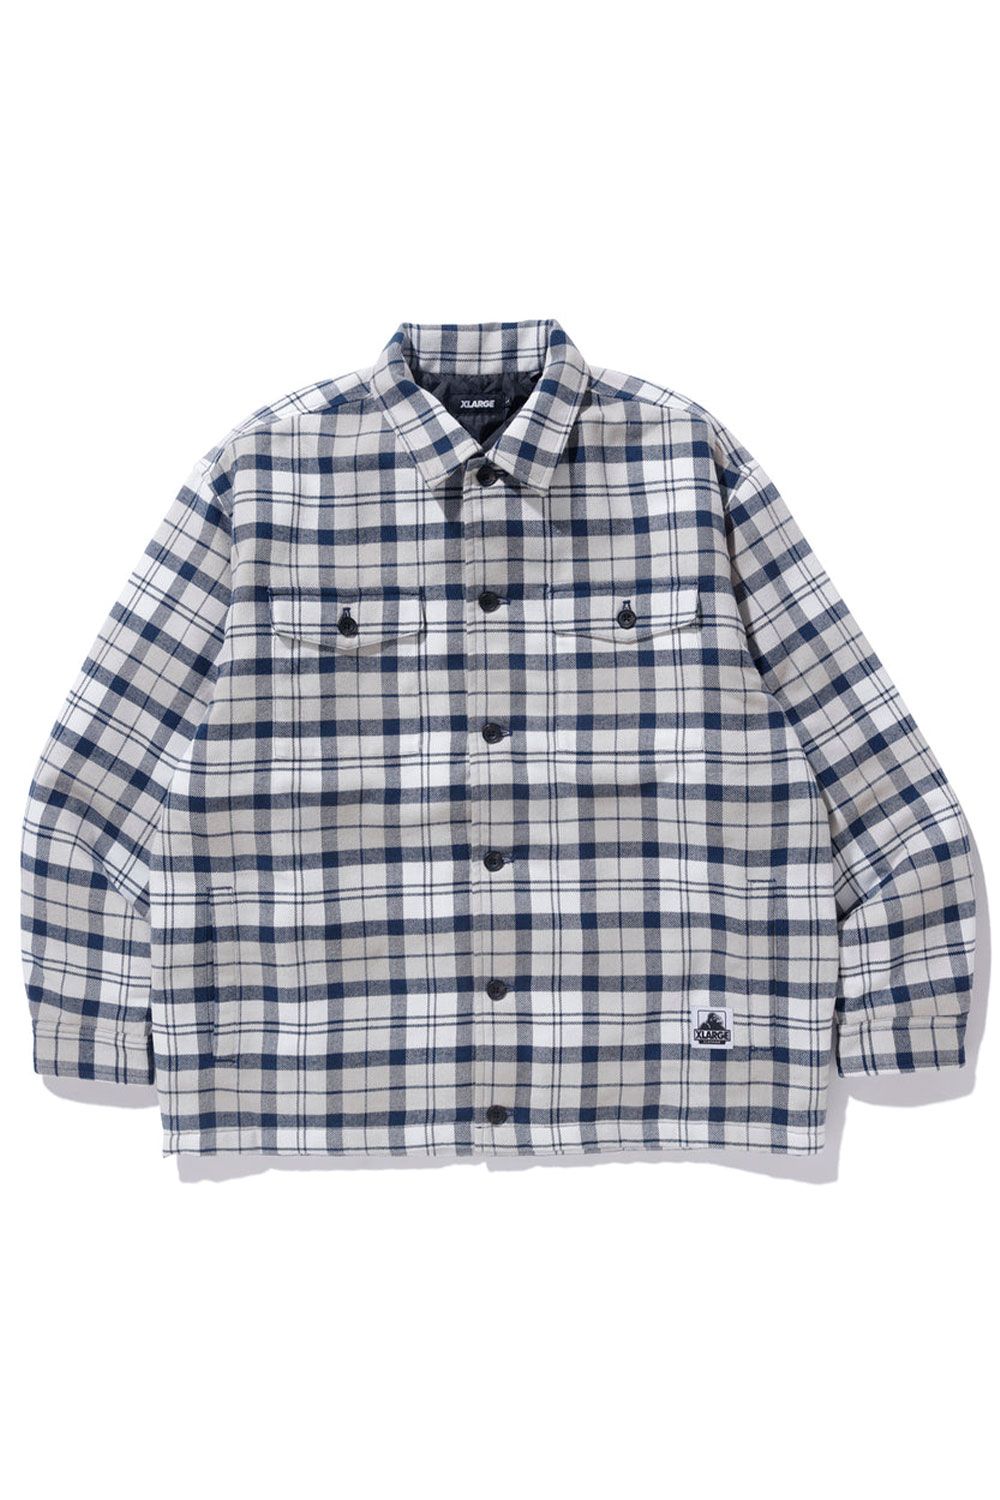 Quilted Flannel Shirt Lサイズ White 新品